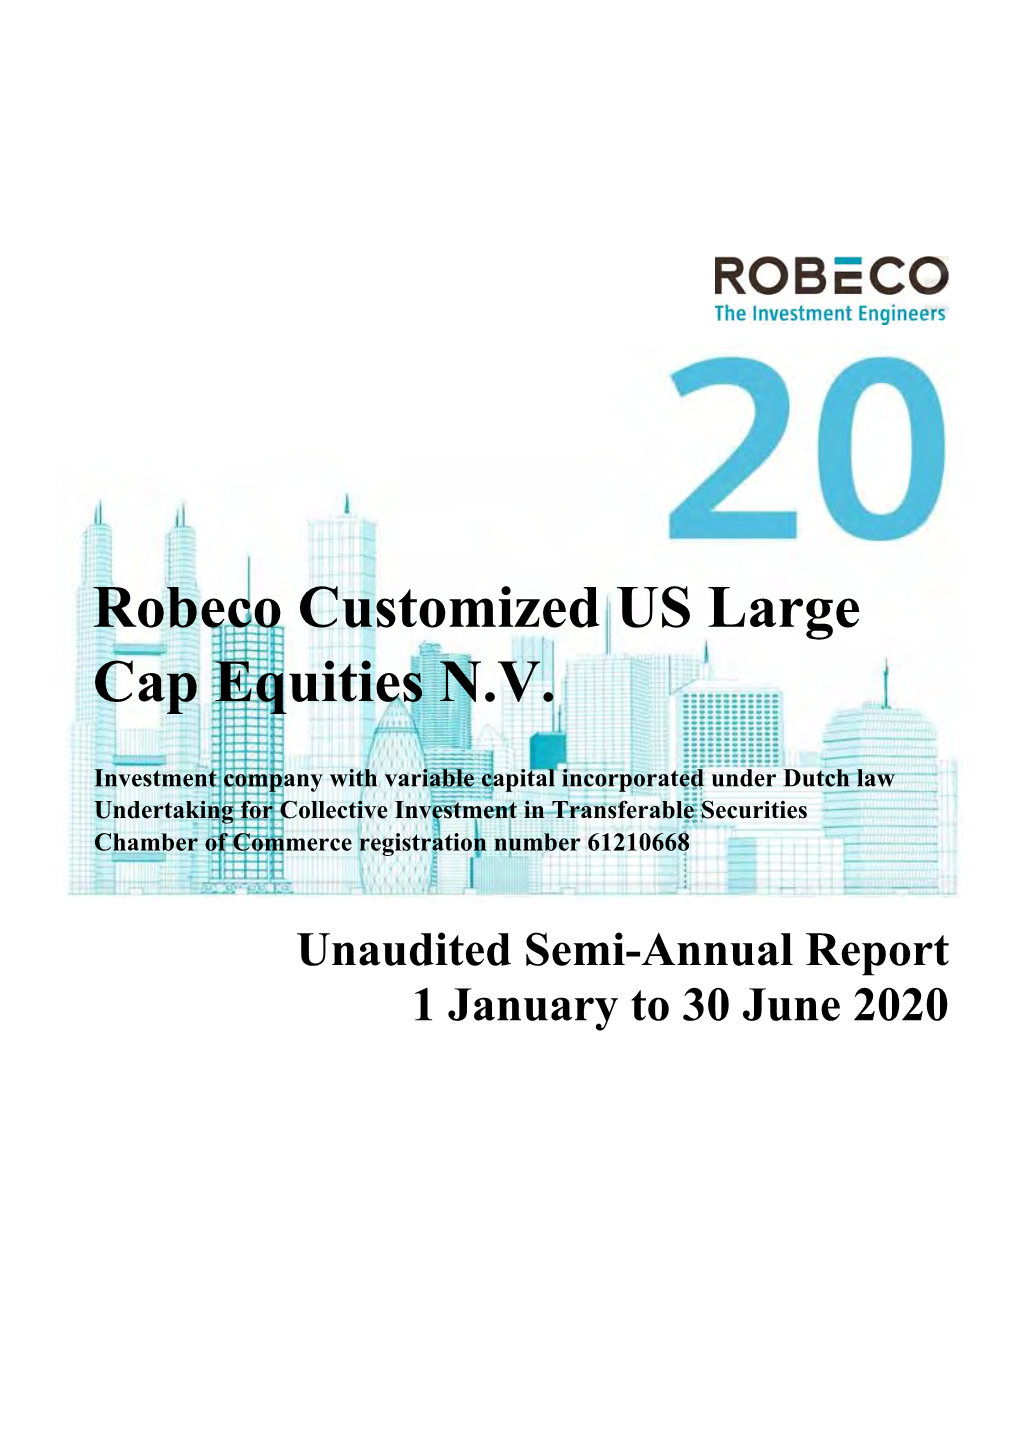 Robeco Customized US Large Cap Equities N.V